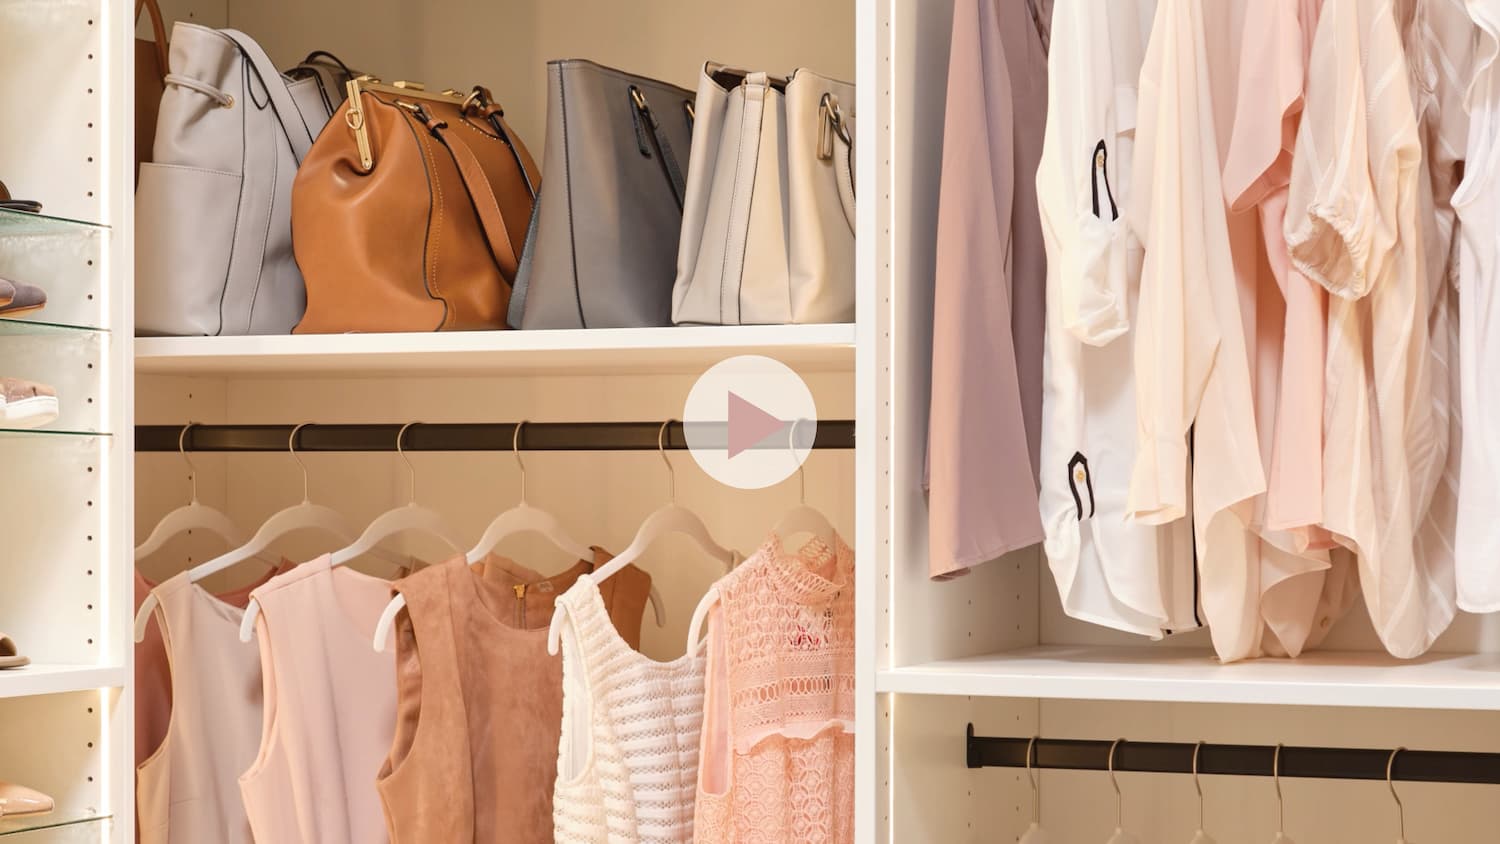 Stow Away Your Accessories in Style With These Purse Storage Ideas  Purse  storage, Organizing purses in closet, Purse organization storage